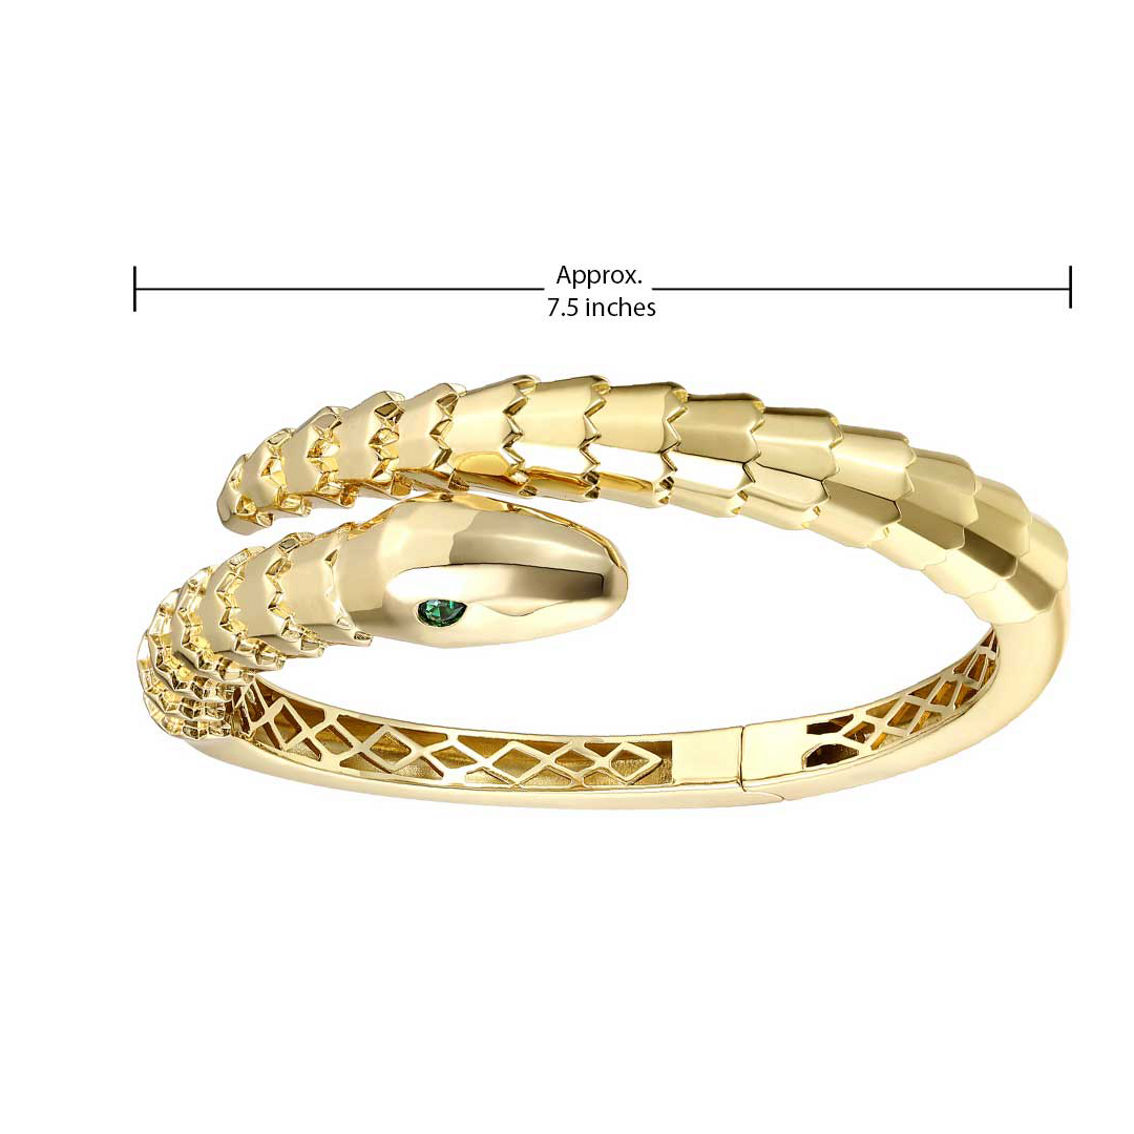 Emerald CZ Textured Coiled Serpent Bypass Bangle Bracelet - Image 2 of 3